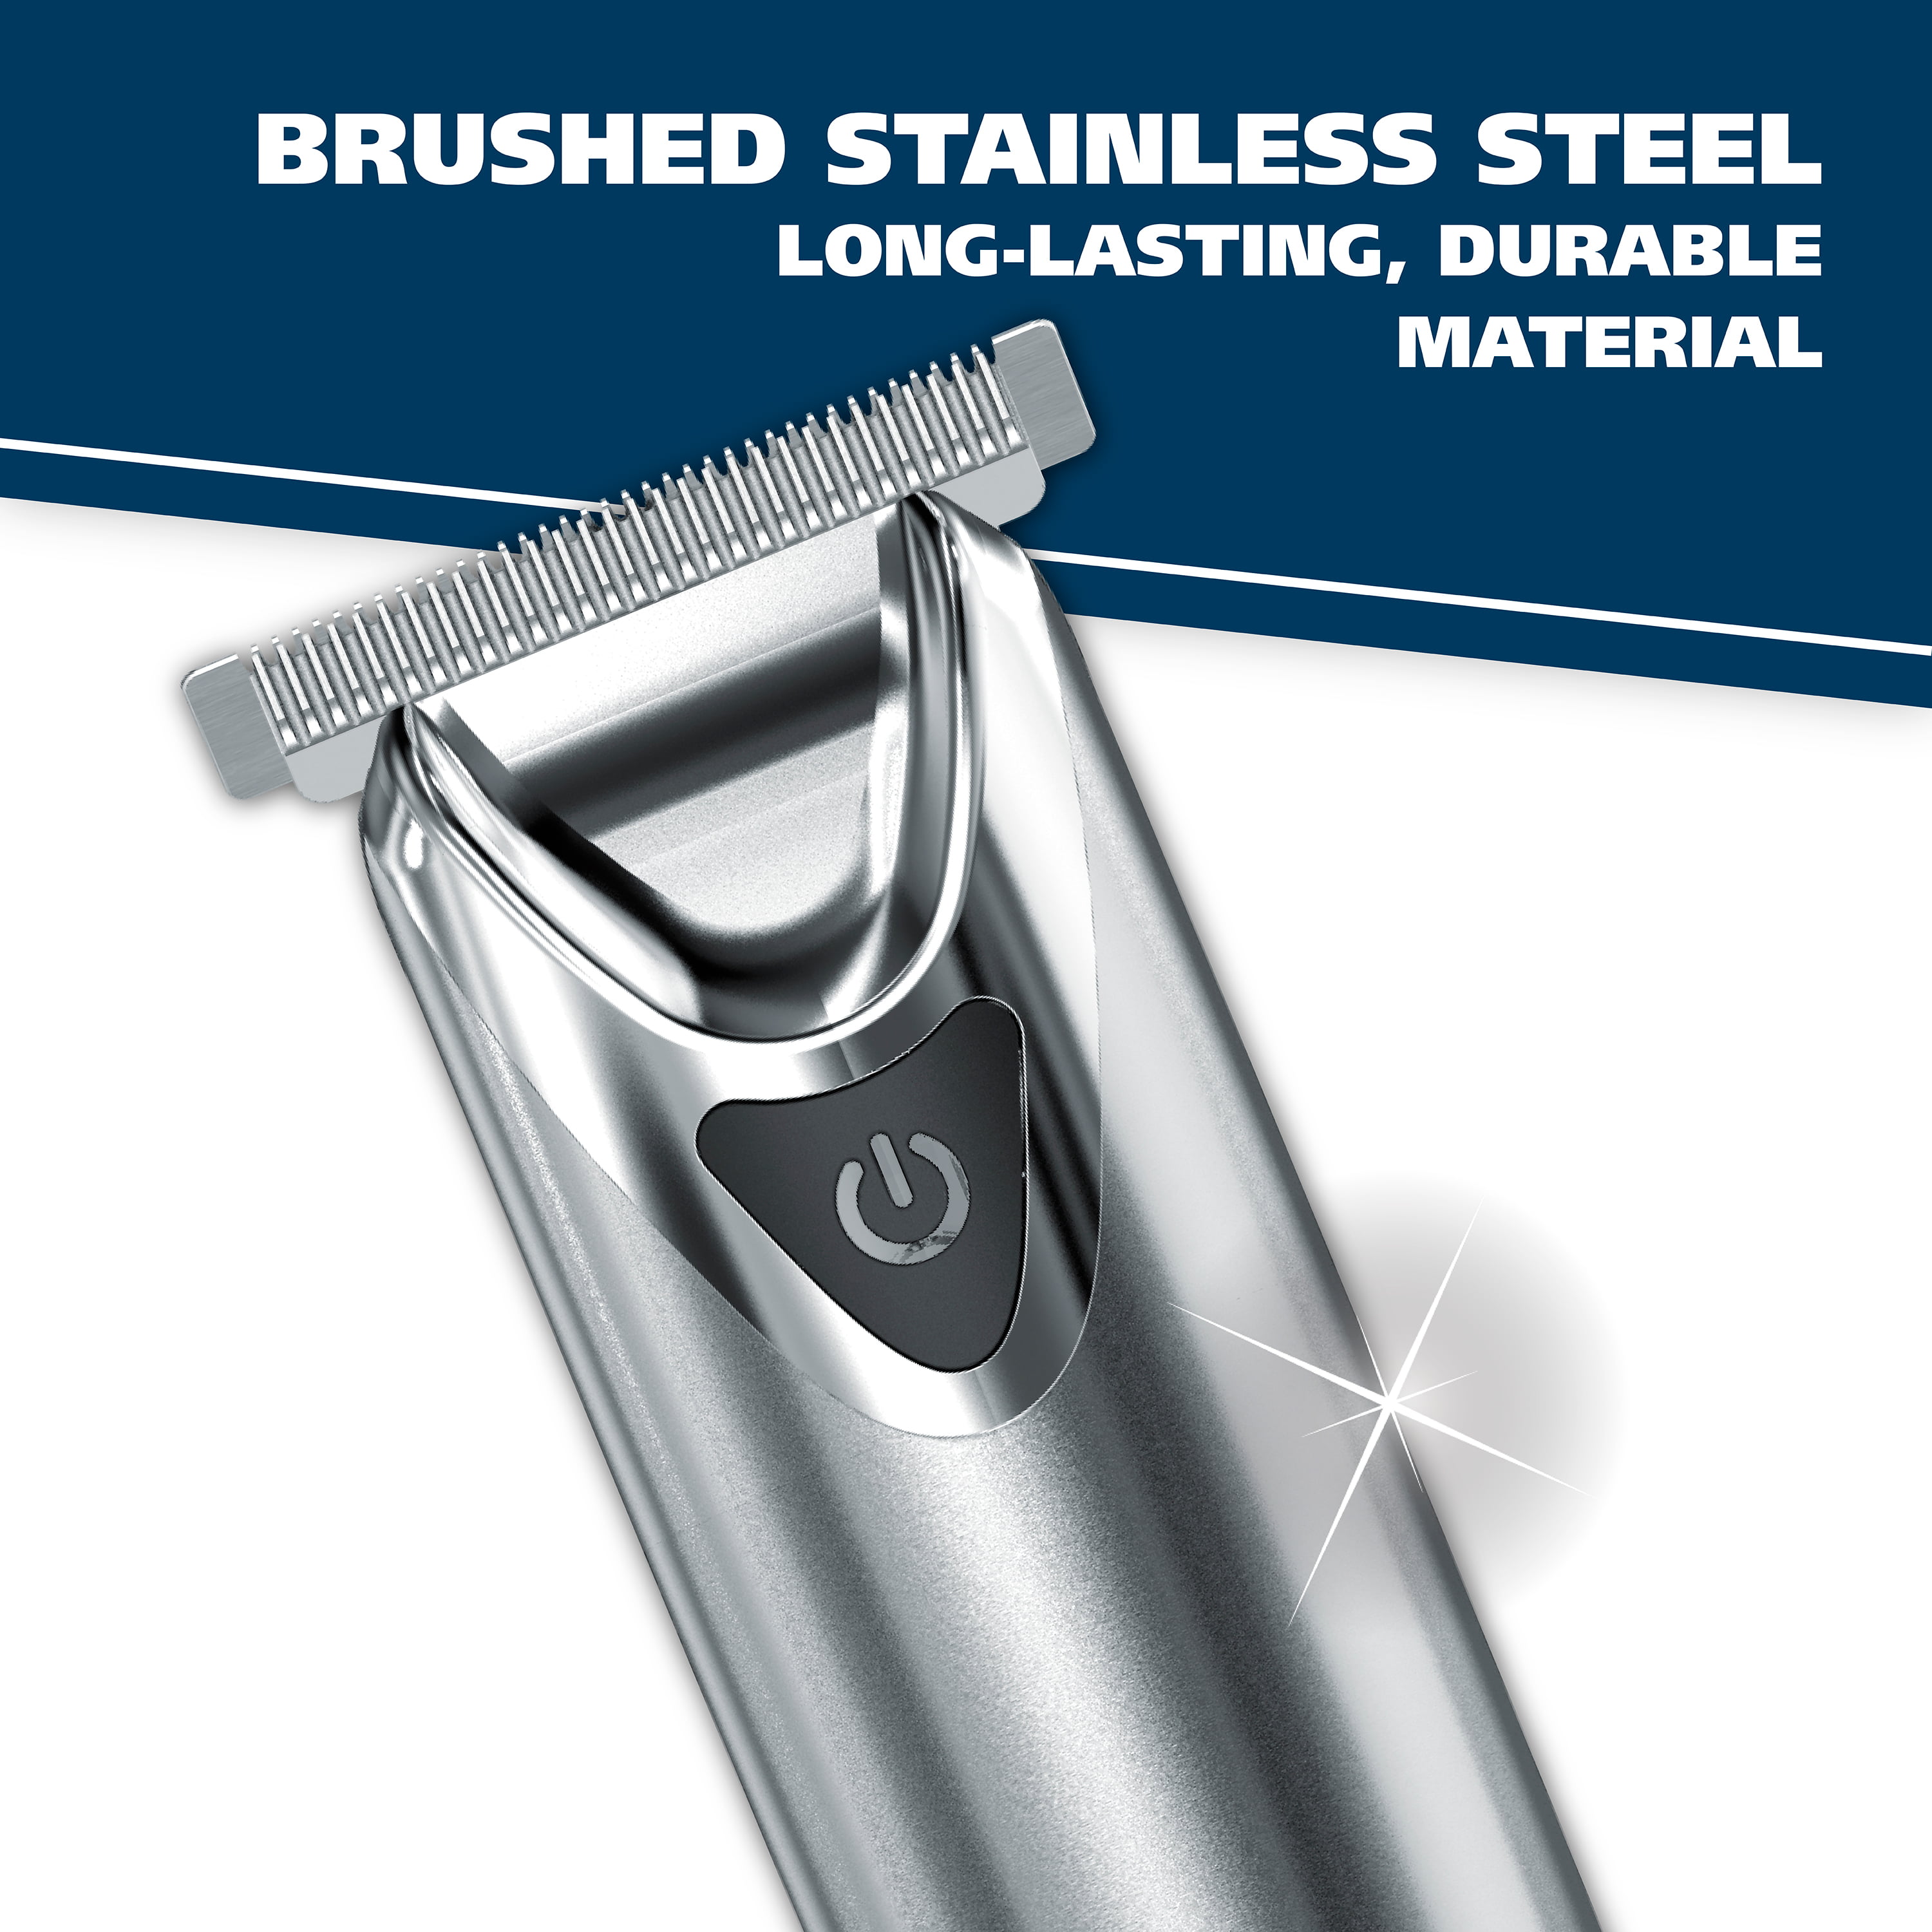 wahl stainless lithium ion